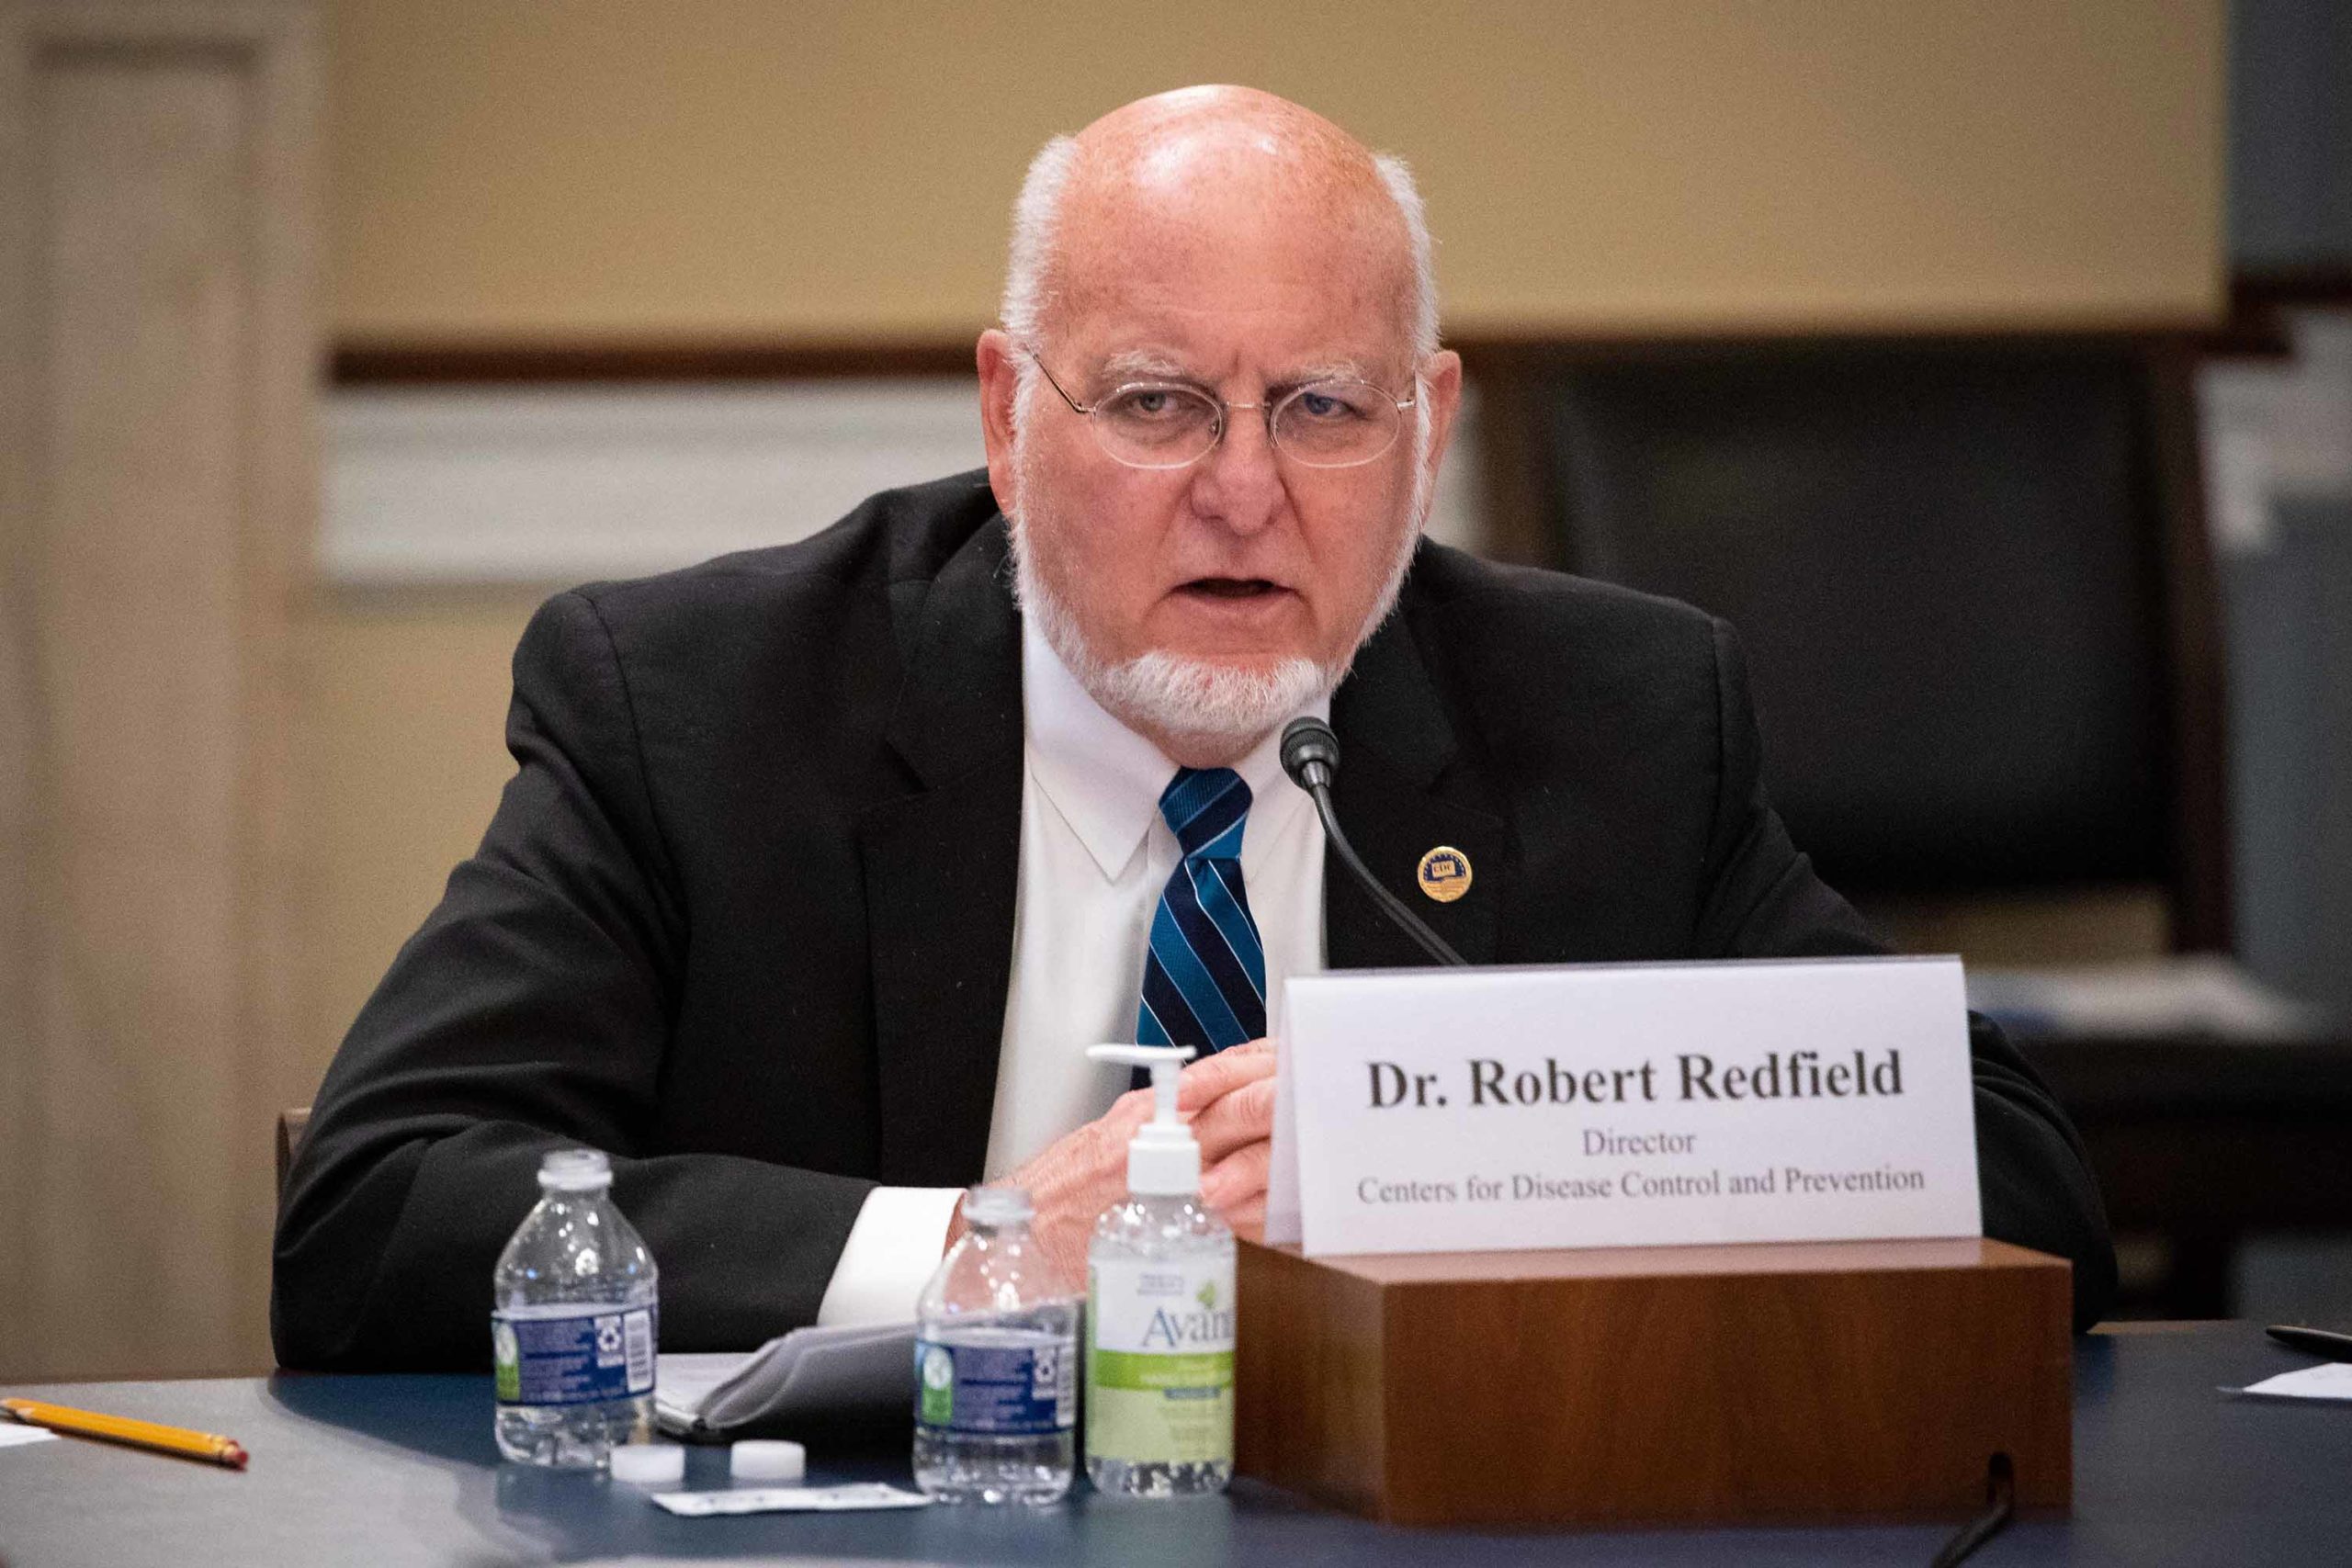 Robert Redfield, director of the Centers for Disease Control and Prevention (CDC), attends a House Appropriations Subcommittee hearing on "COVID-19 Response" on Capitol Hill in Washington, DC, on June 4, 2020.